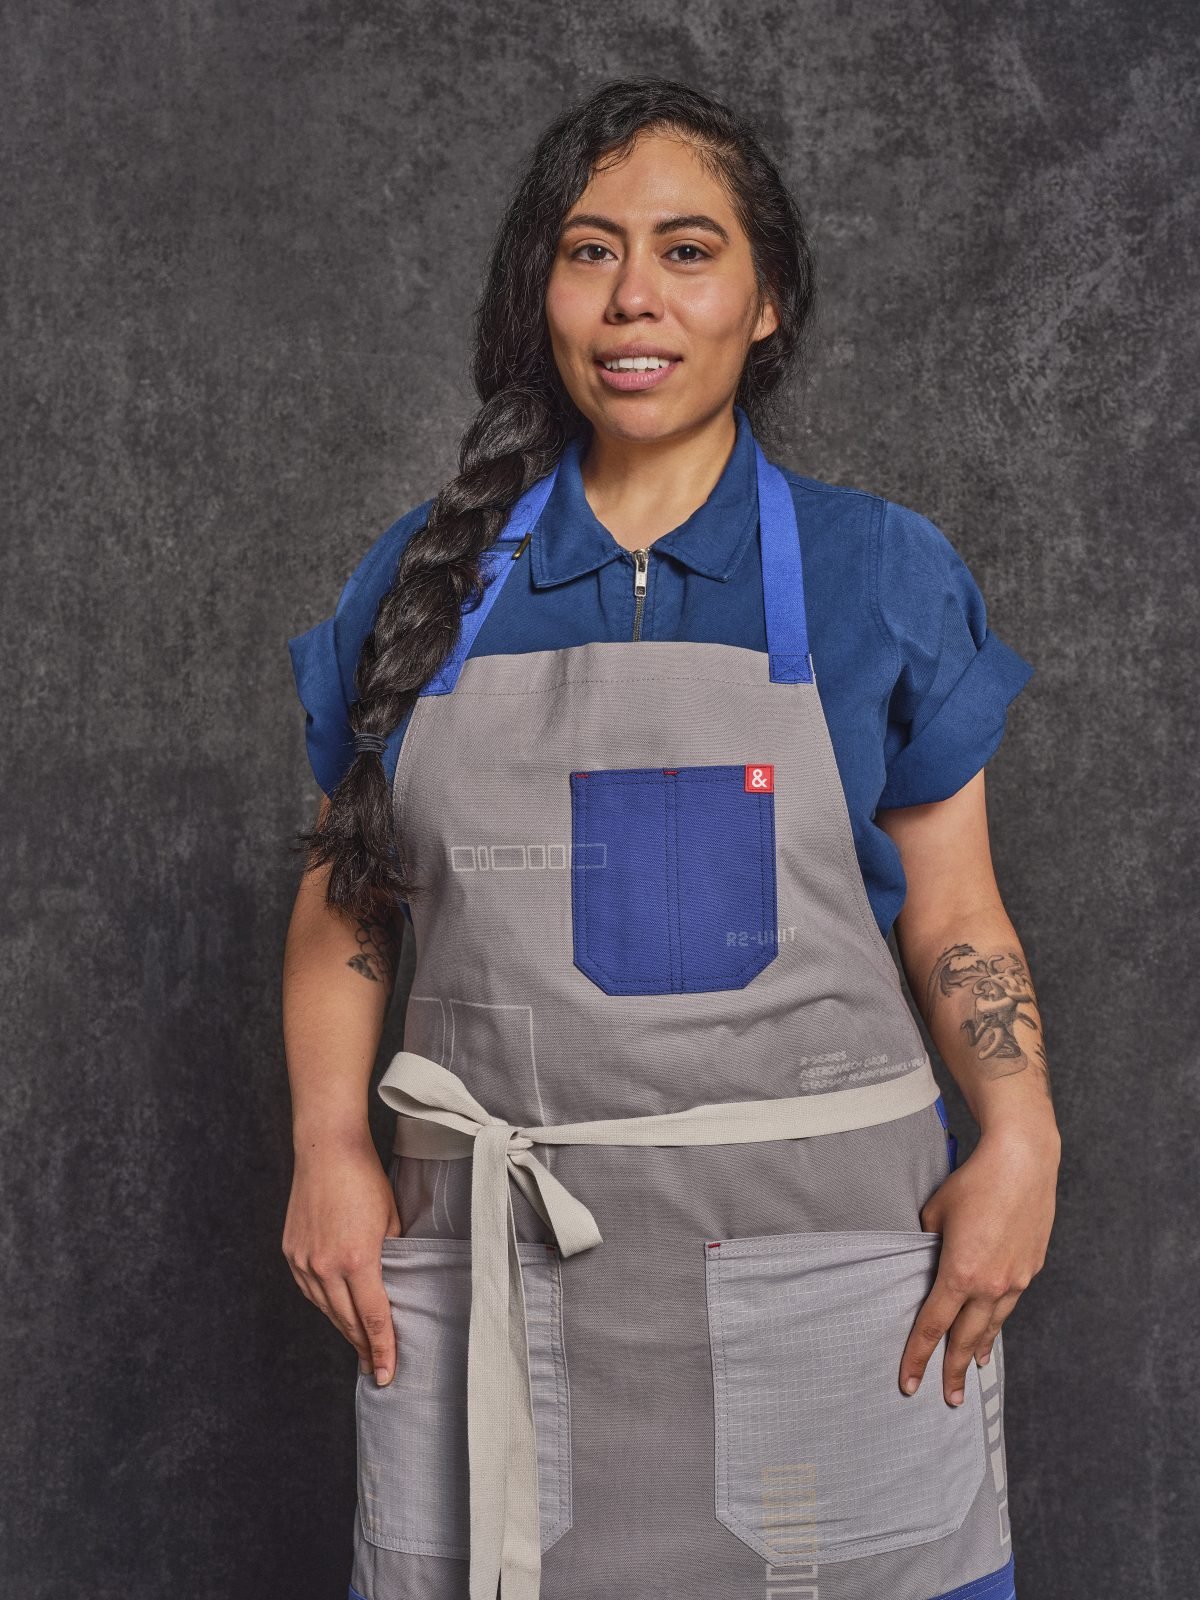 A person wearing an R2-D2 apron